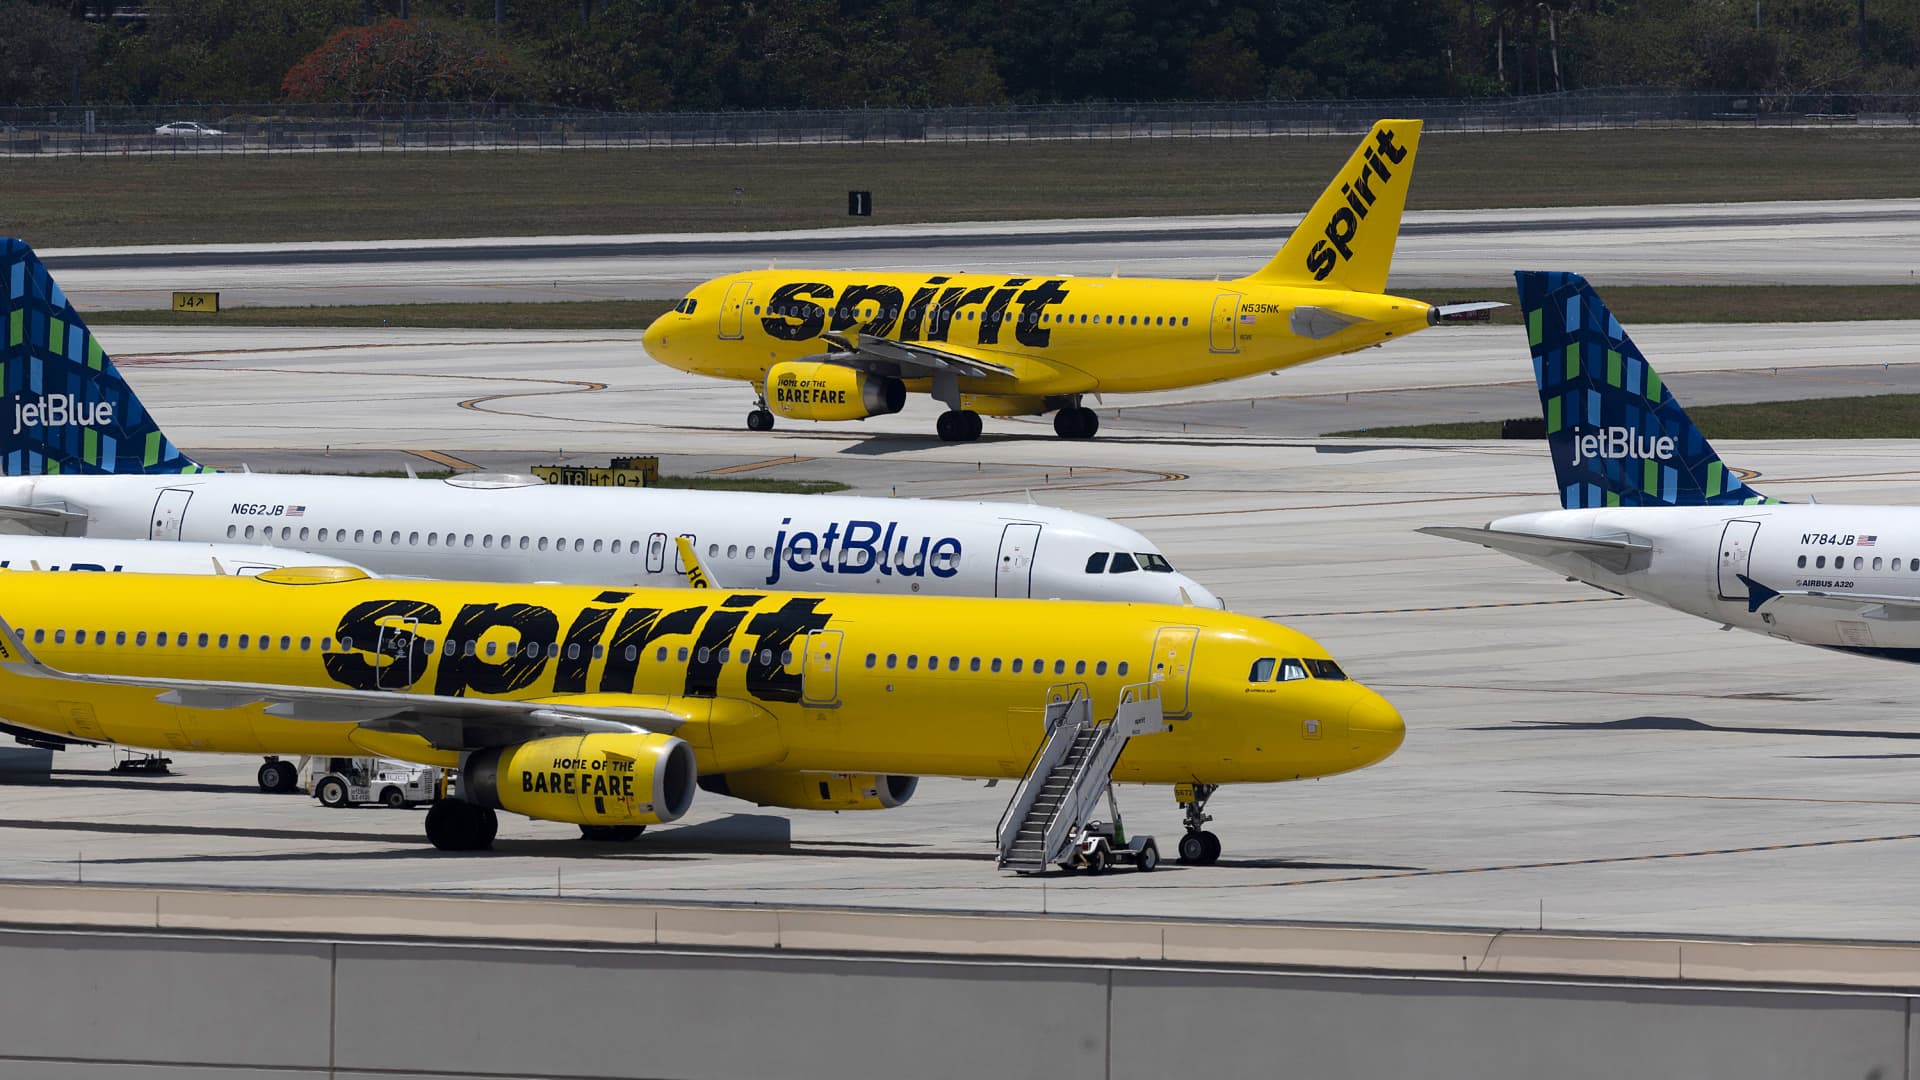 JetBlue Airlines planes are seen near Spirit Airlines planes at the Fort Lauderdale-Hollywood International Airport on May 16, 2022 in Fort Lauderdale, Florida.